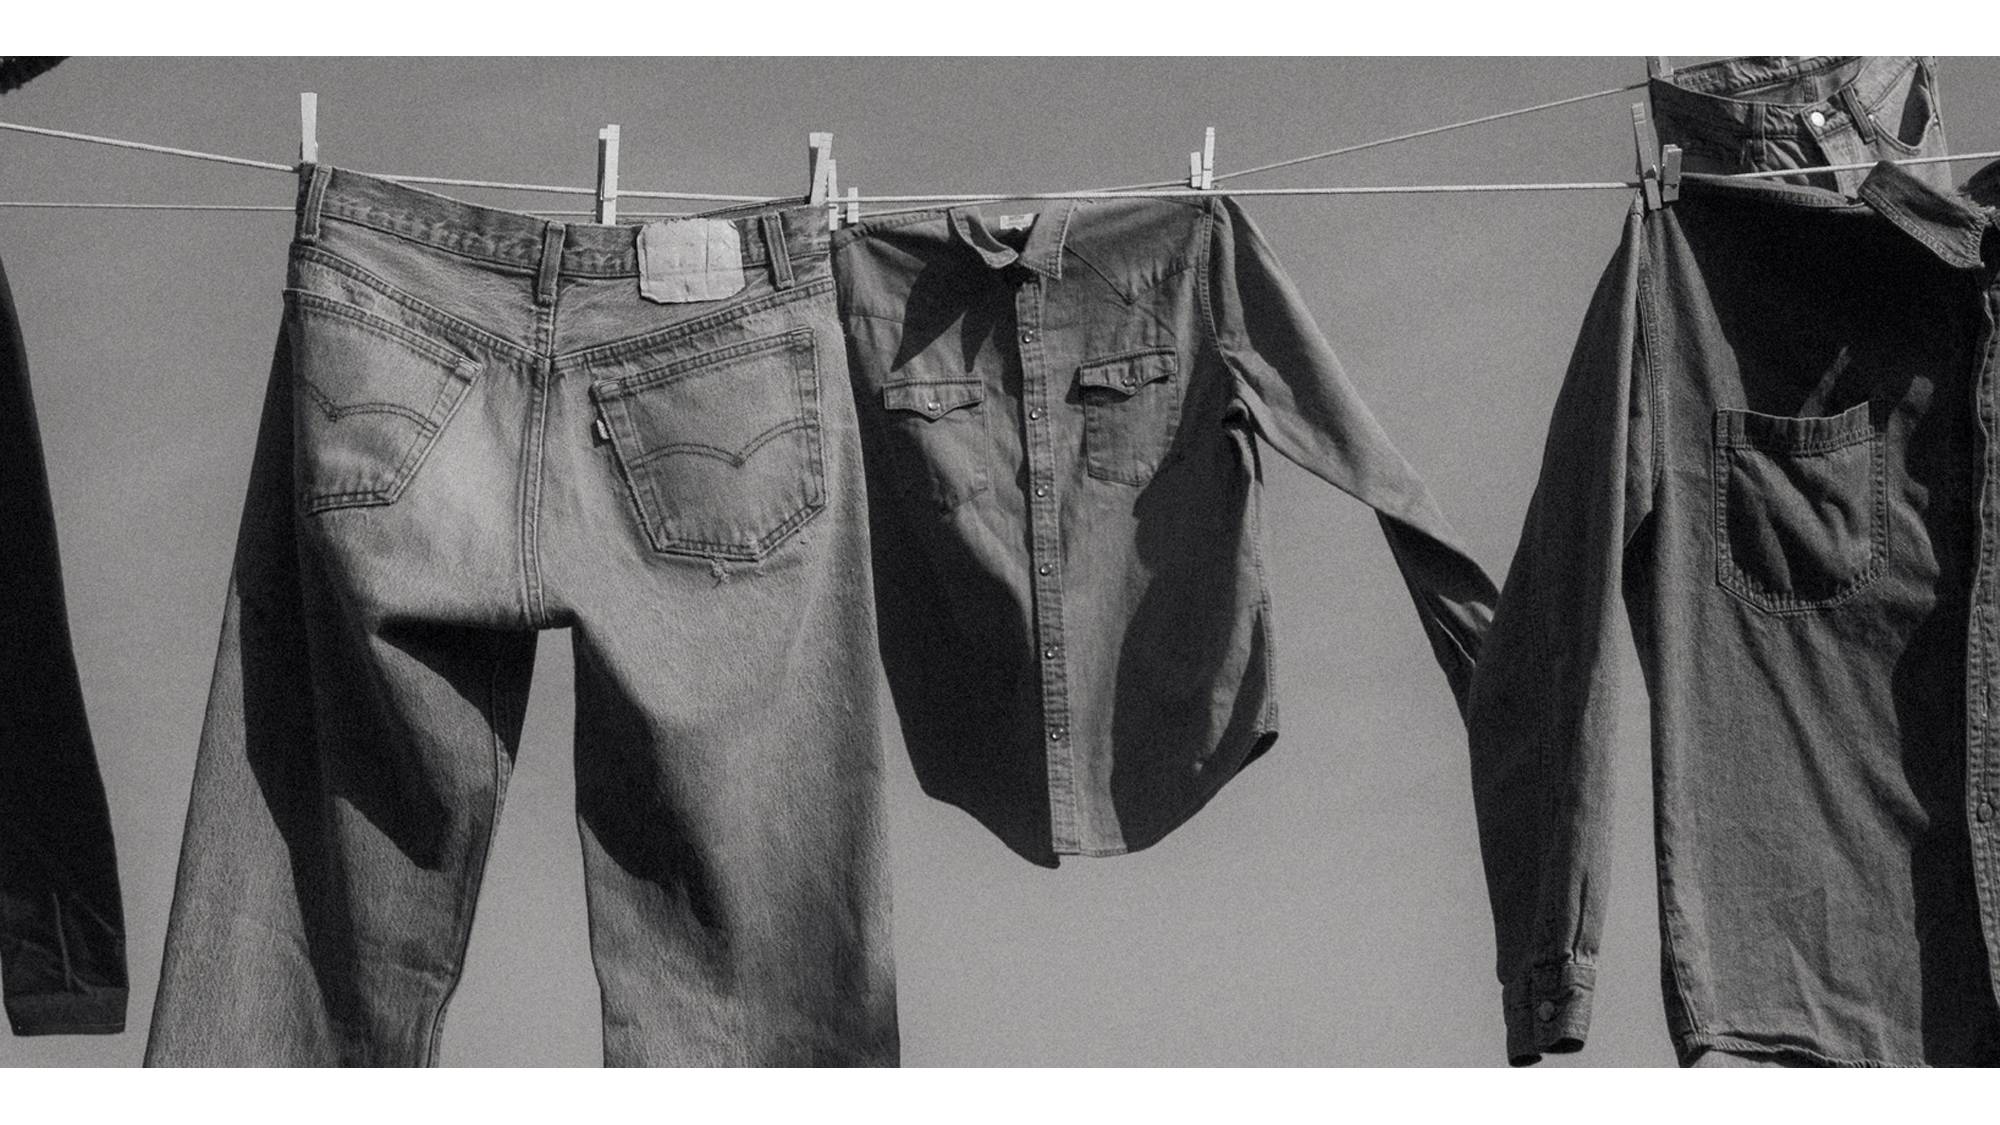 A black and white photo of jeans hanging on a clothing line